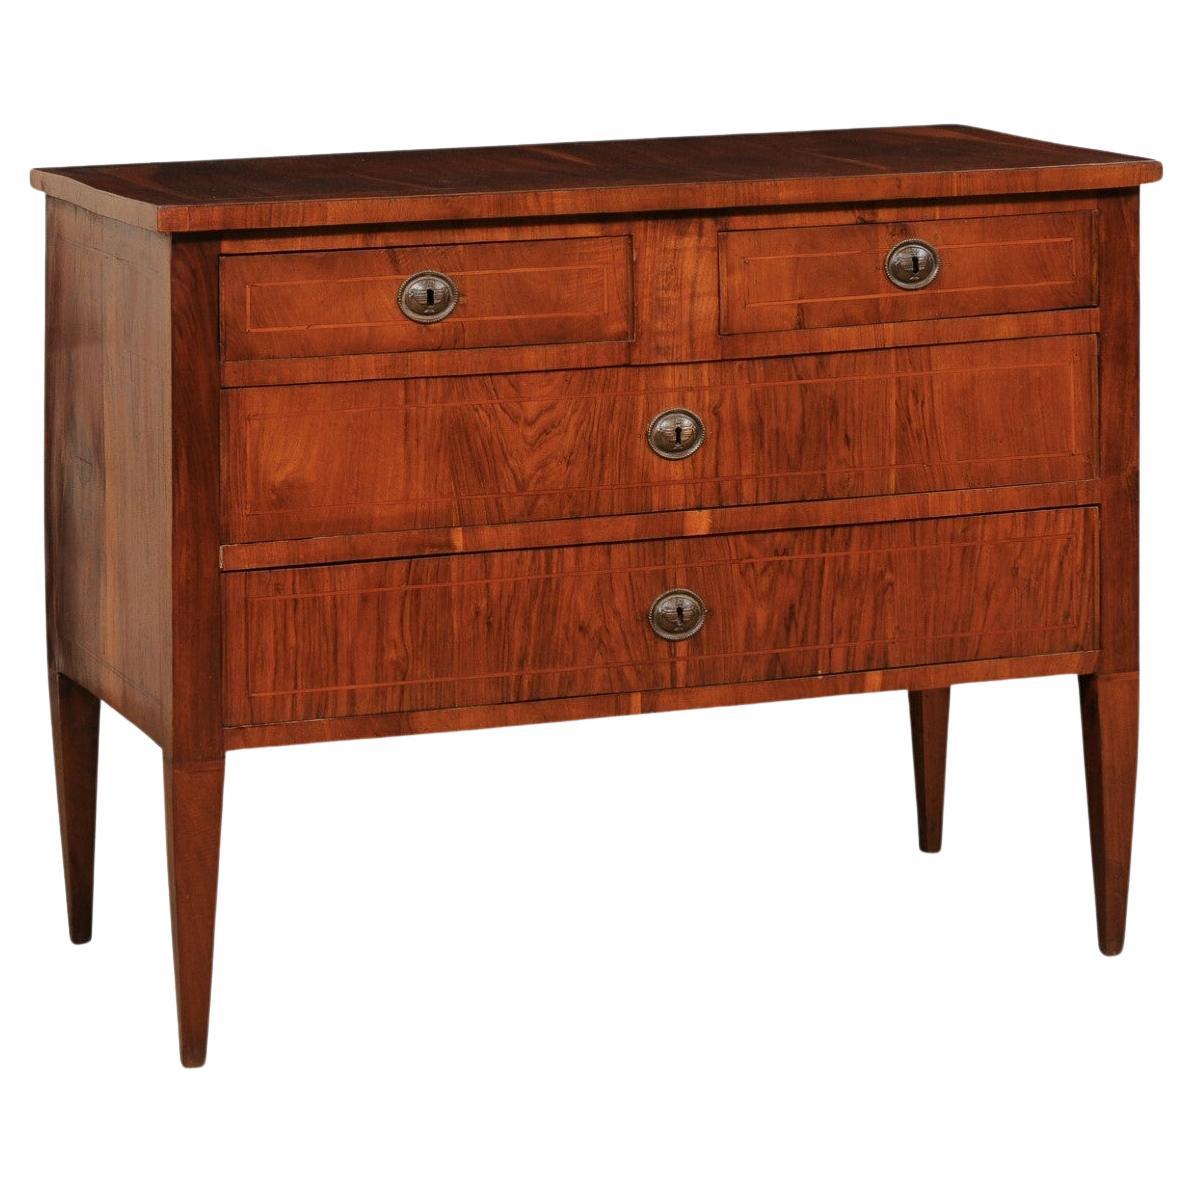 Early 19th C. Italian Chest of Drawers w/Inlay Banding, Designed w/Clean Lines For Sale